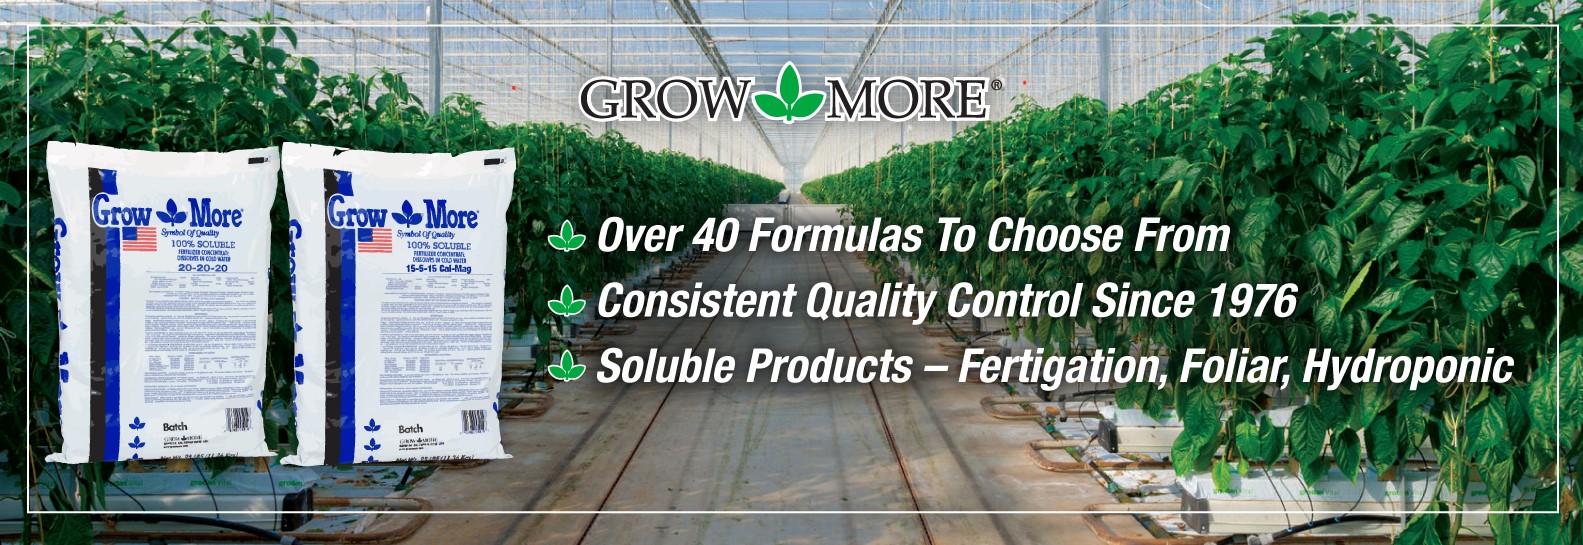 GrowMore. Over 40 formulas to choose from. Consistent Quality Control Since 1976. Soluble Products – Fertigation, Foliar, Hydroponic